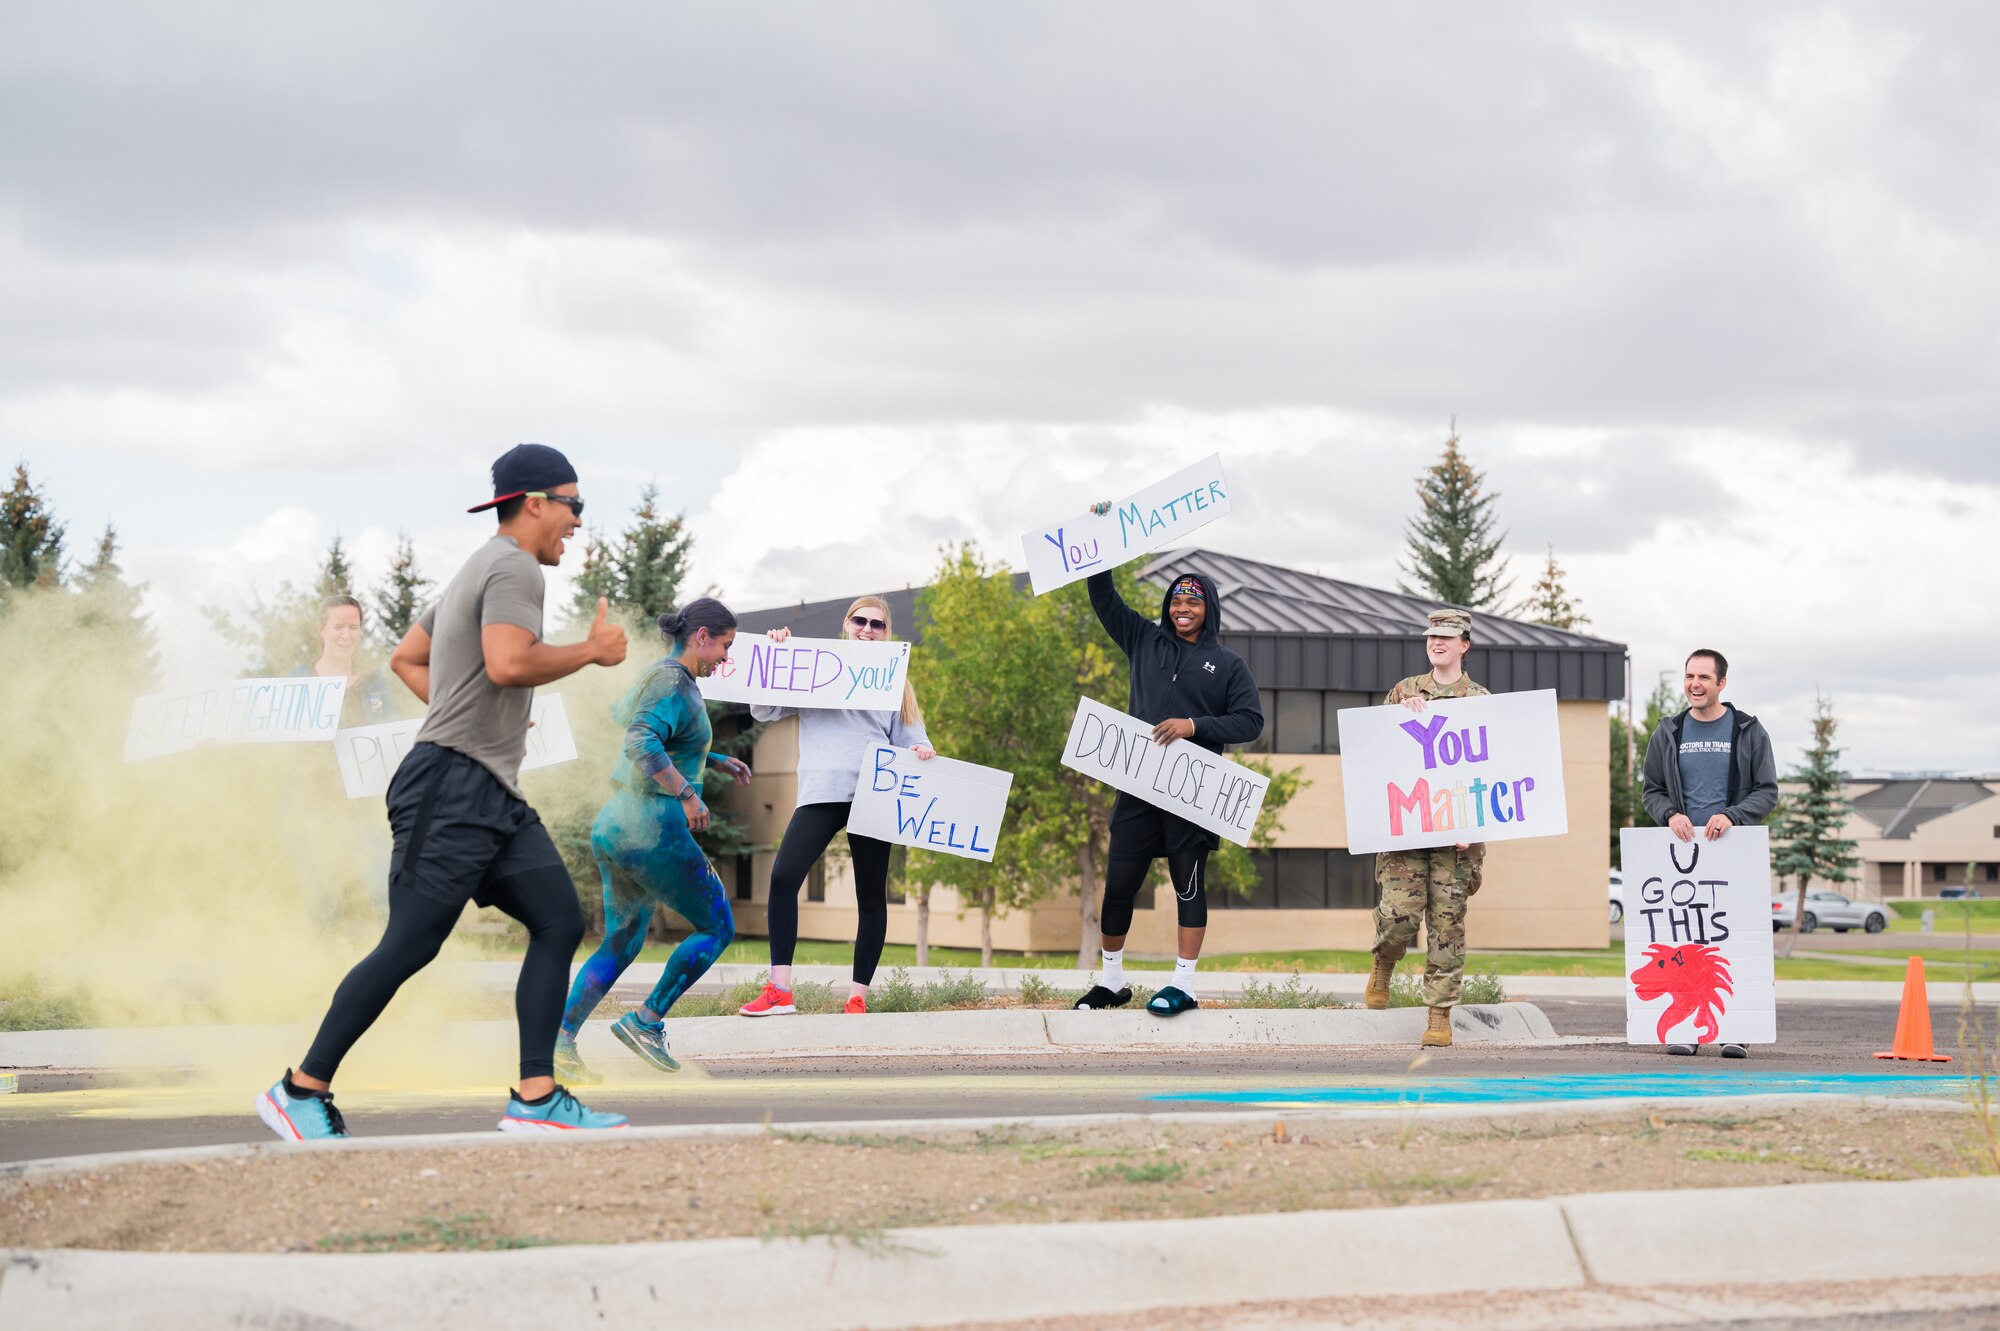 Members of the 341st Missile Wing cross the finish line while others hold signs of encouragement during a Suicide Awareness Color Run Sept. 9, 2022, at Malmstrom Air Force Base, Mont.